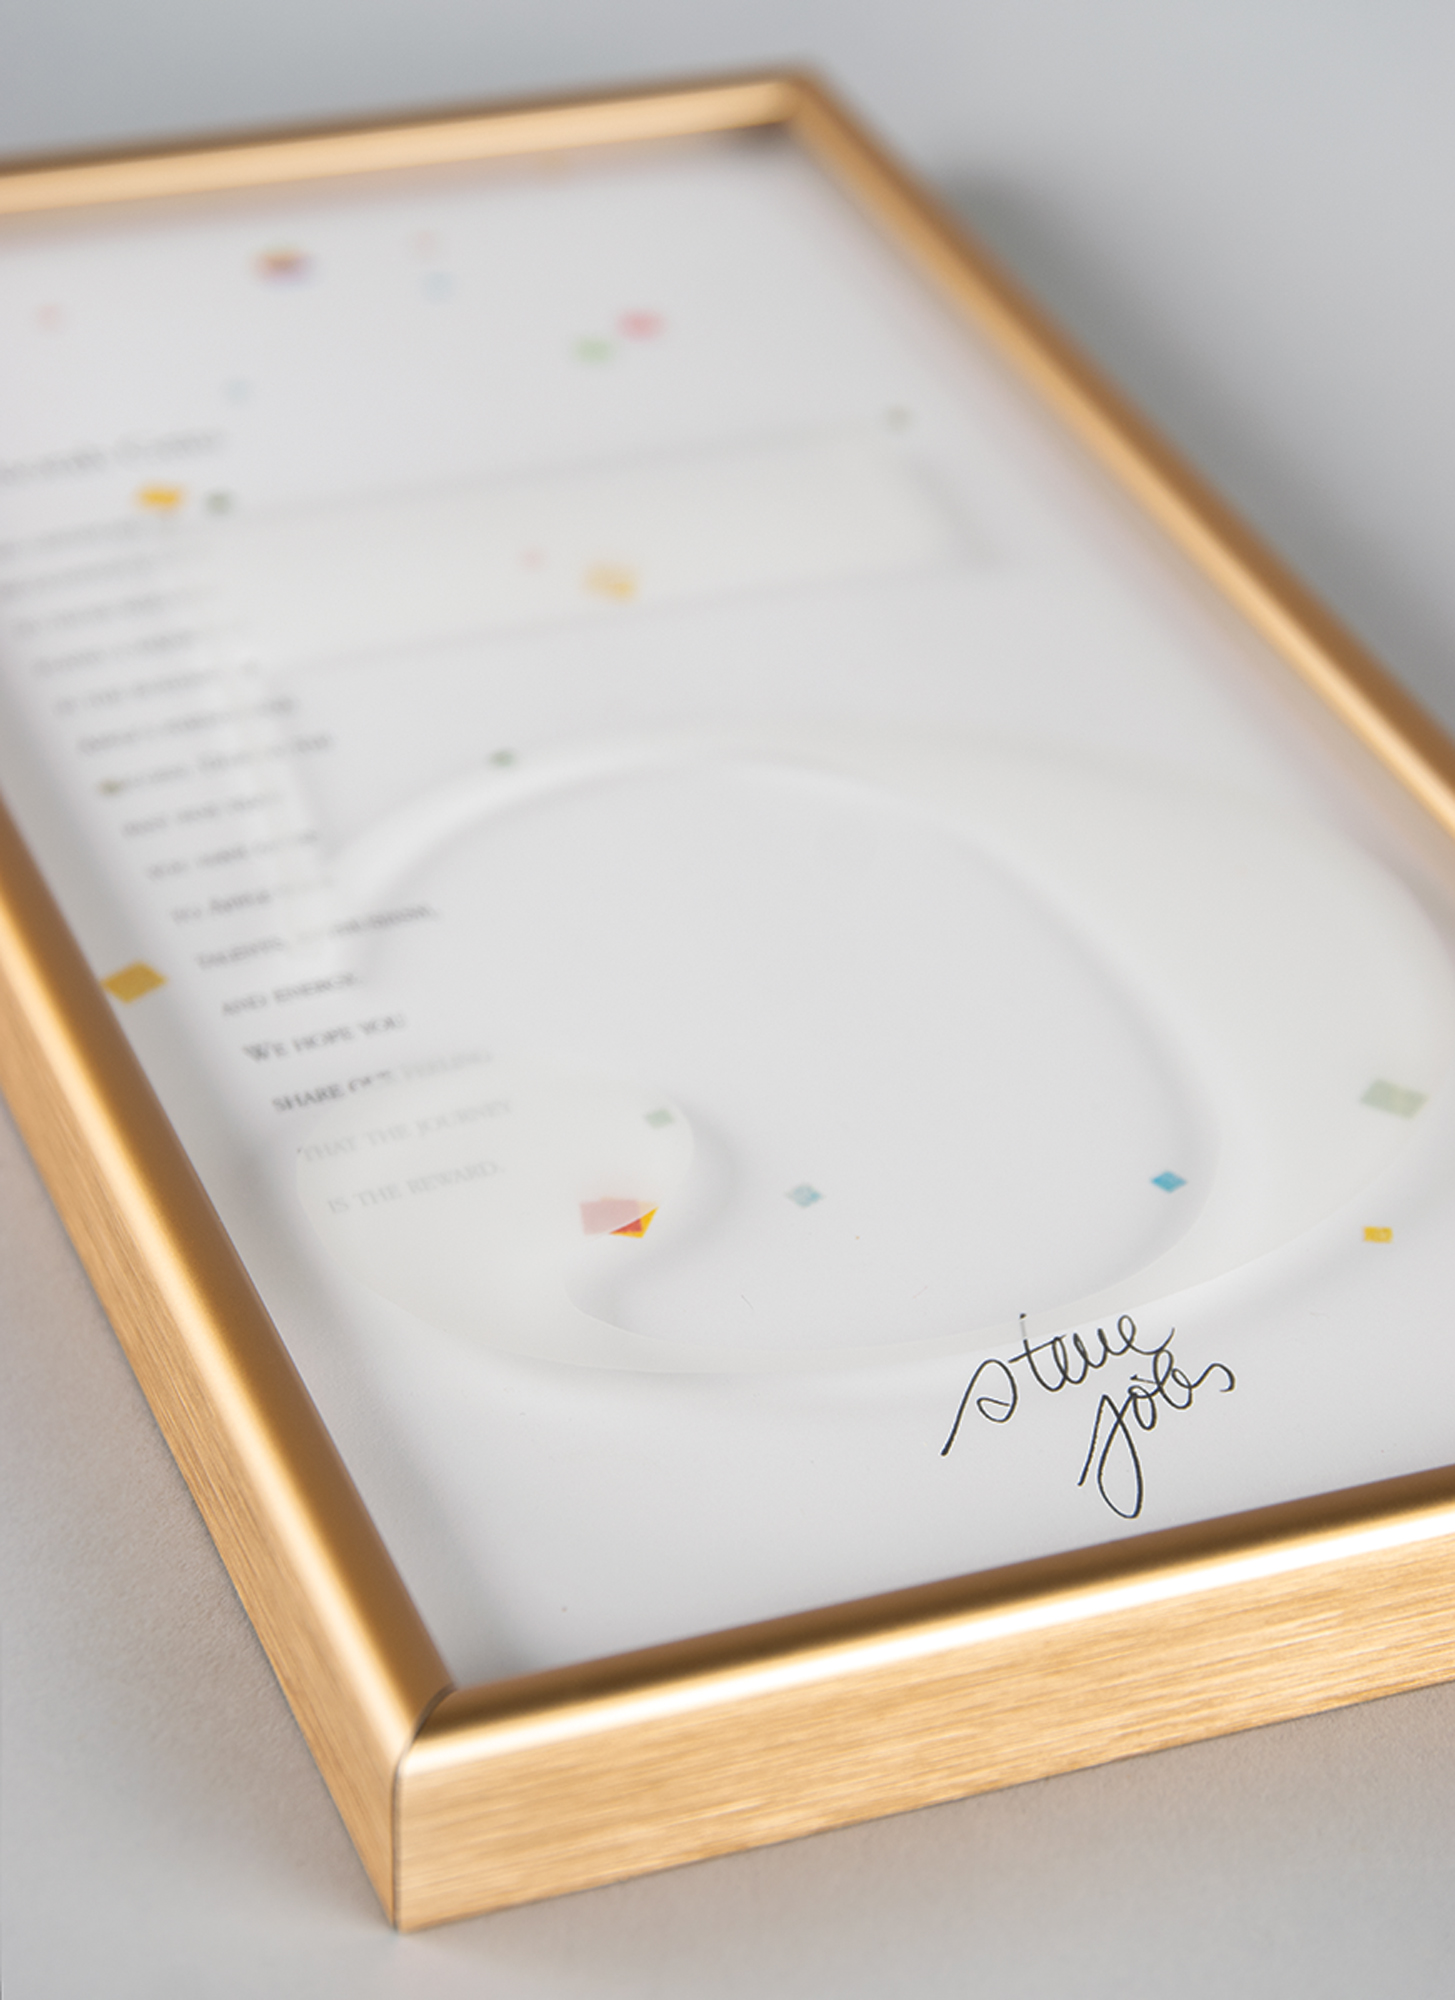 Lot #5081 Steve Jobs Signed Apple 5-Year Service Award for Employee who"played a major role in the building of Apple's phenomenal success"